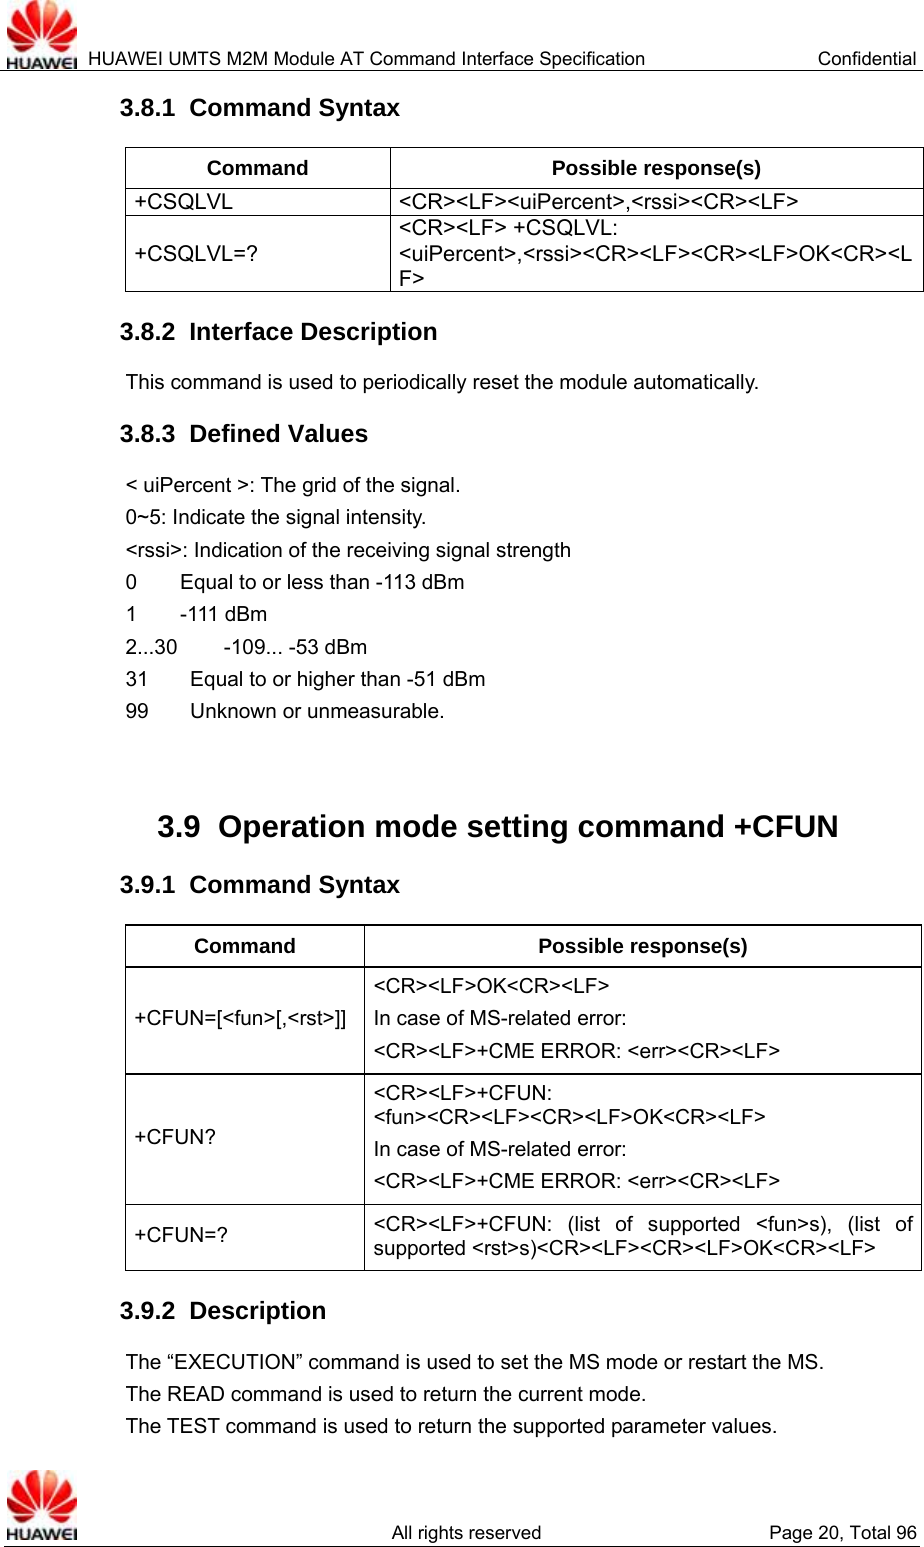  HUAWEI UMTS M2M Module AT Command Interface Specification  Confidential   All rights reserved  Page 20, Total 96 3.8.1  Command Syntax Command Possible response(s) +CSQLVL   &lt;CR&gt;&lt;LF&gt;&lt;uiPercent&gt;,&lt;rssi&gt;&lt;CR&gt;&lt;LF&gt; +CSQLVL=? &lt;CR&gt;&lt;LF&gt; +CSQLVL: &lt;uiPercent&gt;,&lt;rssi&gt;&lt;CR&gt;&lt;LF&gt;&lt;CR&gt;&lt;LF&gt;OK&lt;CR&gt;&lt;LF&gt; 3.8.2  Interface Description This command is used to periodically reset the module automatically. 3.8.3  Defined Values &lt; uiPercent &gt;: The grid of the signal.   0~5: Indicate the signal intensity. &lt;rssi&gt;: Indication of the receiving signal strength   0     Equal to or less than -113 dBm 1     -111 dBm 2...30     -109... -53 dBm 31        Equal to or higher than -51 dBm 99    Unknown or unmeasurable.   3.9  Operation mode setting command +CFUN 3.9.1  Command Syntax Command Possible response(s) +CFUN=[&lt;fun&gt;[,&lt;rst&gt;]] &lt;CR&gt;&lt;LF&gt;OK&lt;CR&gt;&lt;LF&gt; In case of MS-related error: &lt;CR&gt;&lt;LF&gt;+CME ERROR: &lt;err&gt;&lt;CR&gt;&lt;LF&gt; +CFUN?  &lt;CR&gt;&lt;LF&gt;+CFUN: &lt;fun&gt;&lt;CR&gt;&lt;LF&gt;&lt;CR&gt;&lt;LF&gt;OK&lt;CR&gt;&lt;LF&gt; In case of MS-related error: &lt;CR&gt;&lt;LF&gt;+CME ERROR: &lt;err&gt;&lt;CR&gt;&lt;LF&gt; +CFUN=?  &lt;CR&gt;&lt;LF&gt;+CFUN: (list of supported &lt;fun&gt;s), (list of supported &lt;rst&gt;s)&lt;CR&gt;&lt;LF&gt;&lt;CR&gt;&lt;LF&gt;OK&lt;CR&gt;&lt;LF&gt; 3.9.2  Description The “EXECUTION” command is used to set the MS mode or restart the MS.   The READ command is used to return the current mode.   The TEST command is used to return the supported parameter values.   